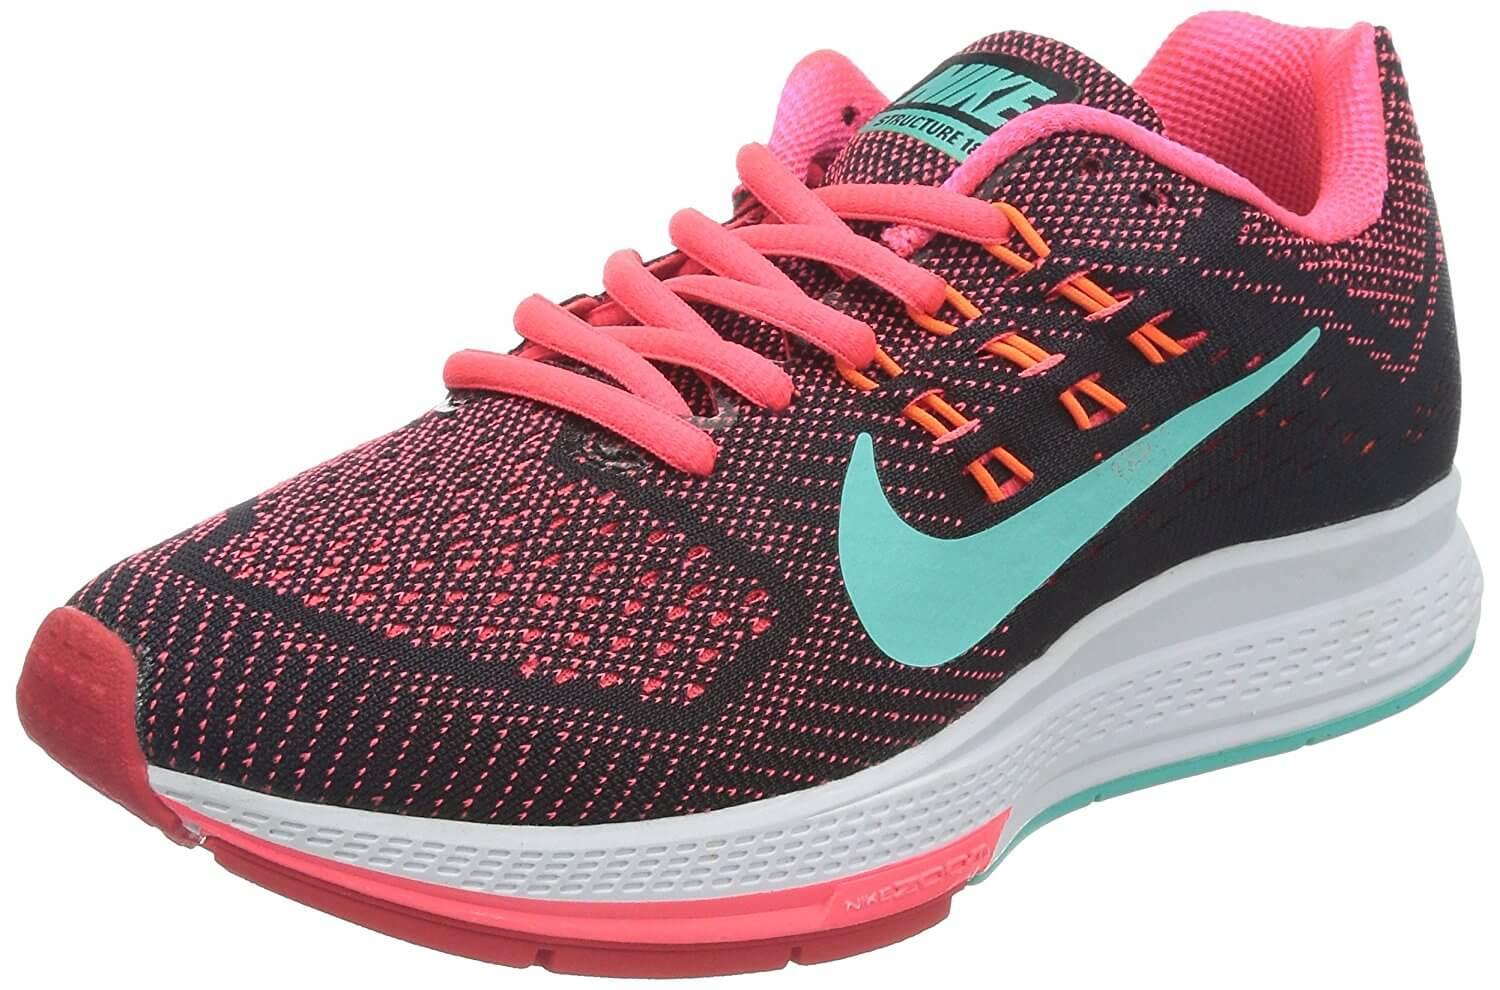 The Nike Air Zoom Structure 18 is a terrific addition to the Air Zoom product line.